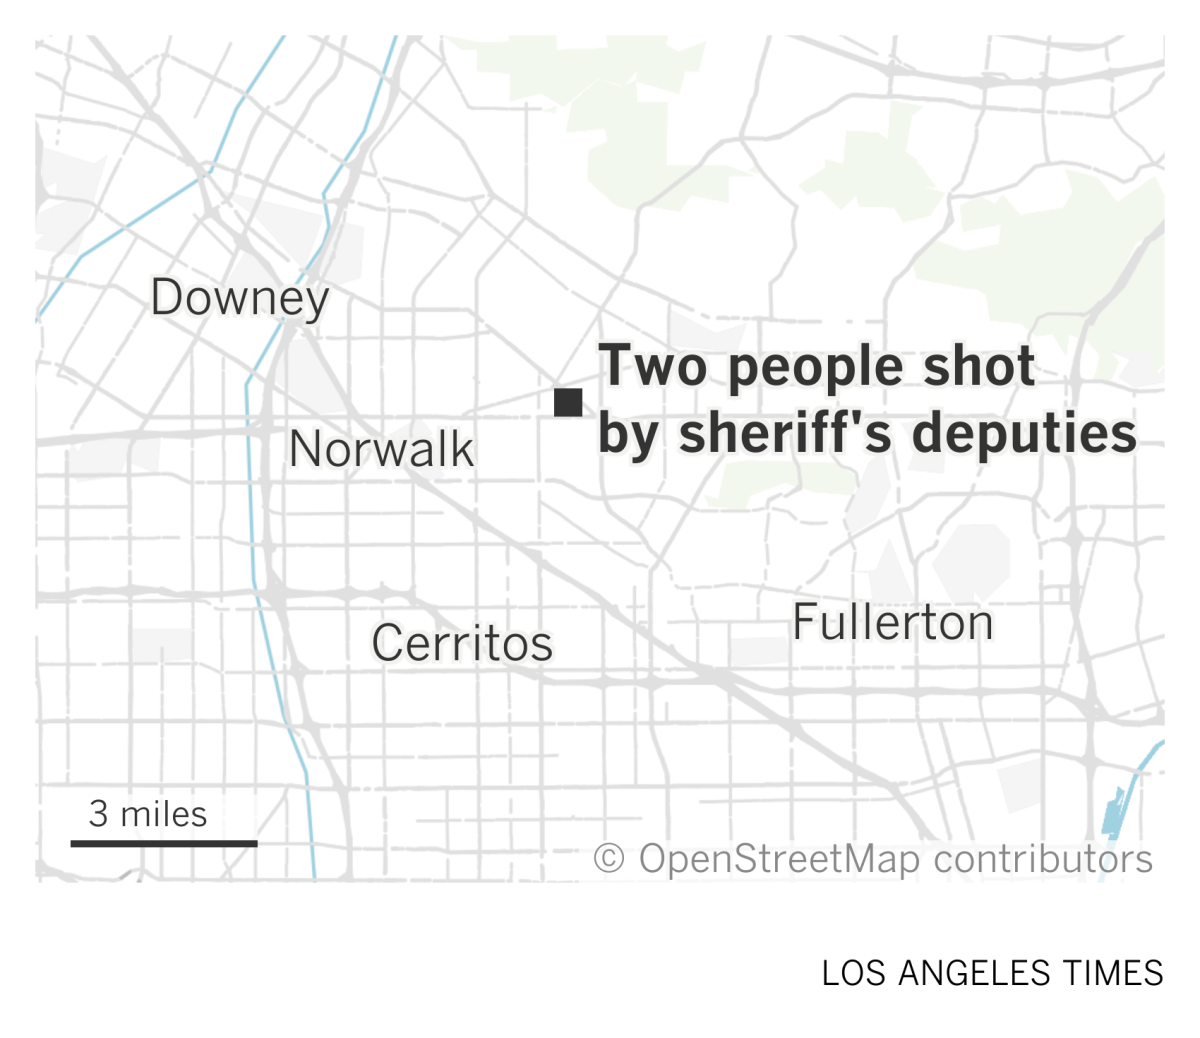 A map shows where two people were shot by sheriff's deputies in an unincorporated area between Norwalk and La Mirada.